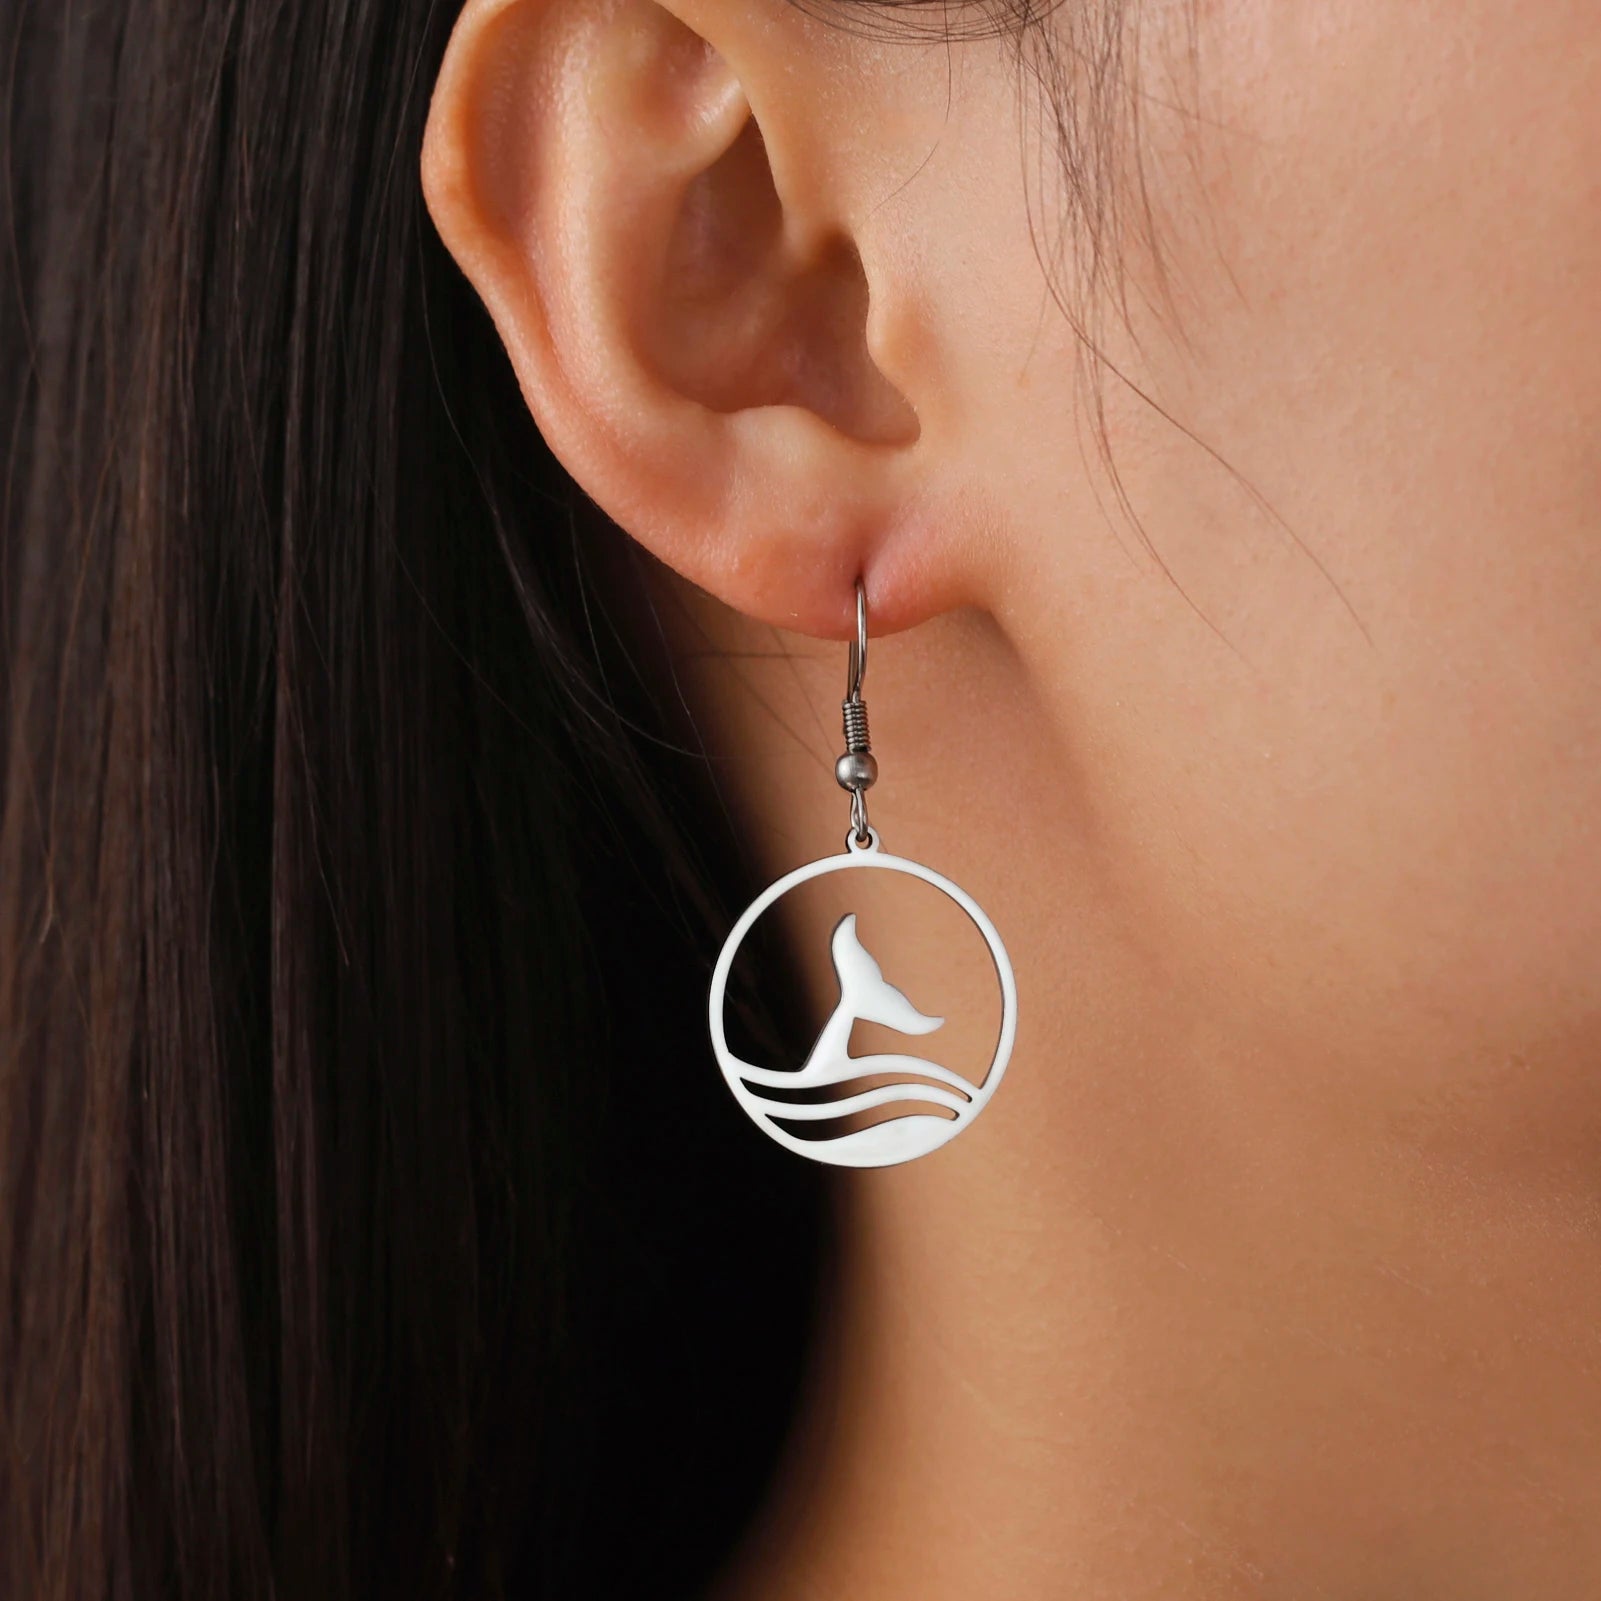 Sea Whale Tail Round Pendant Drop Earrings - Madeinsea©